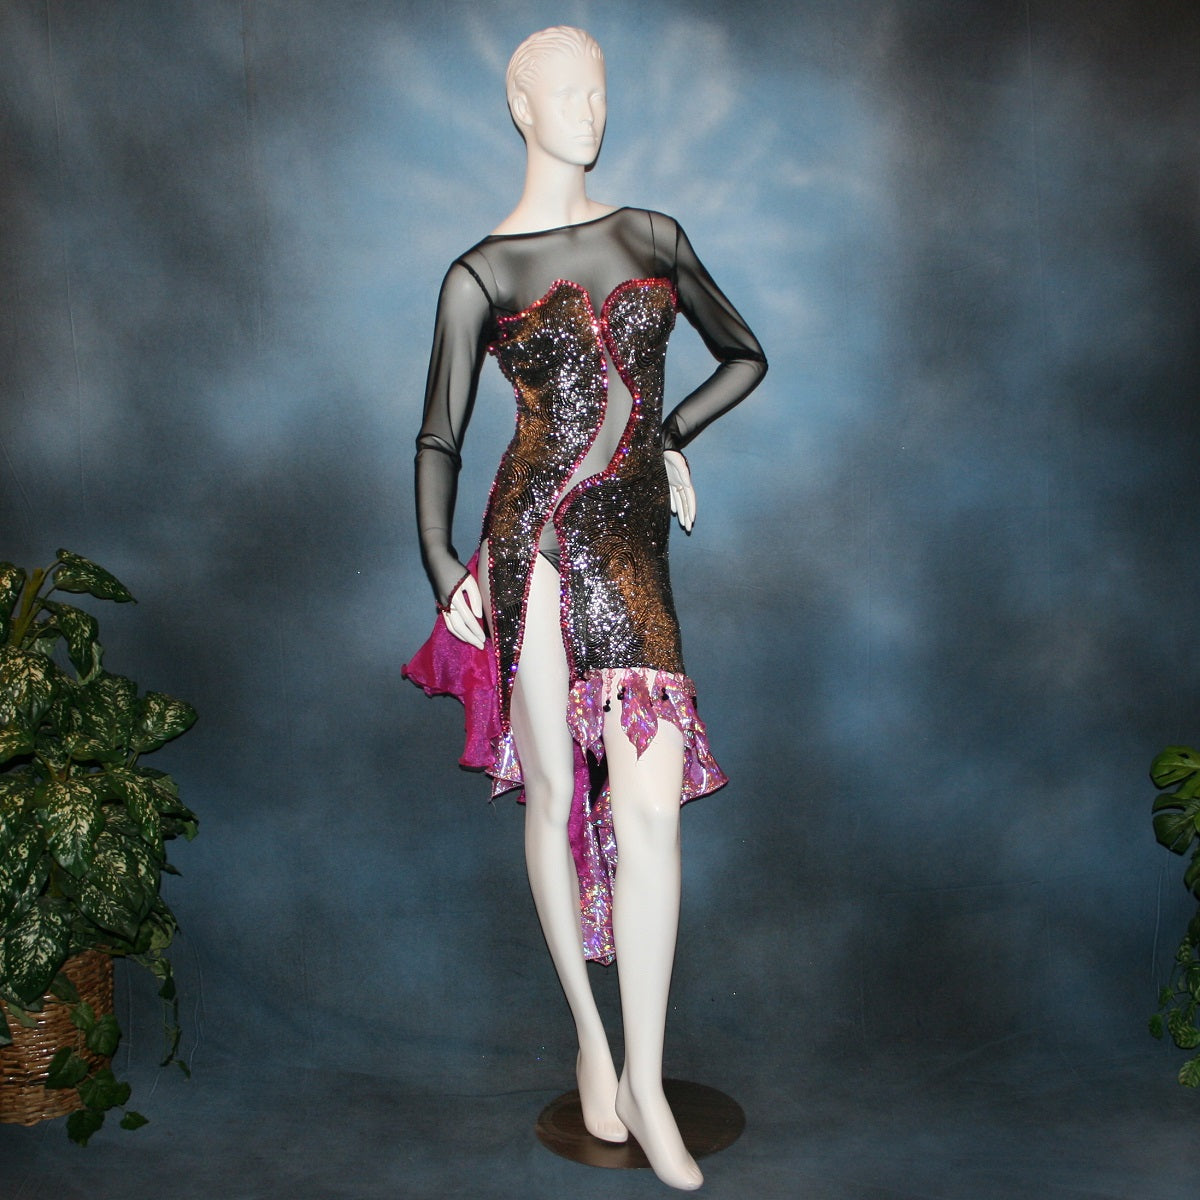 Crystal's Creations Black & silver Latin/rhythm dress with pink accents created of gorgeous silver swirls on black glitter slinky on a sheer stretch mesh base, embellished with pink Swarovski rhinestone work & hand beading